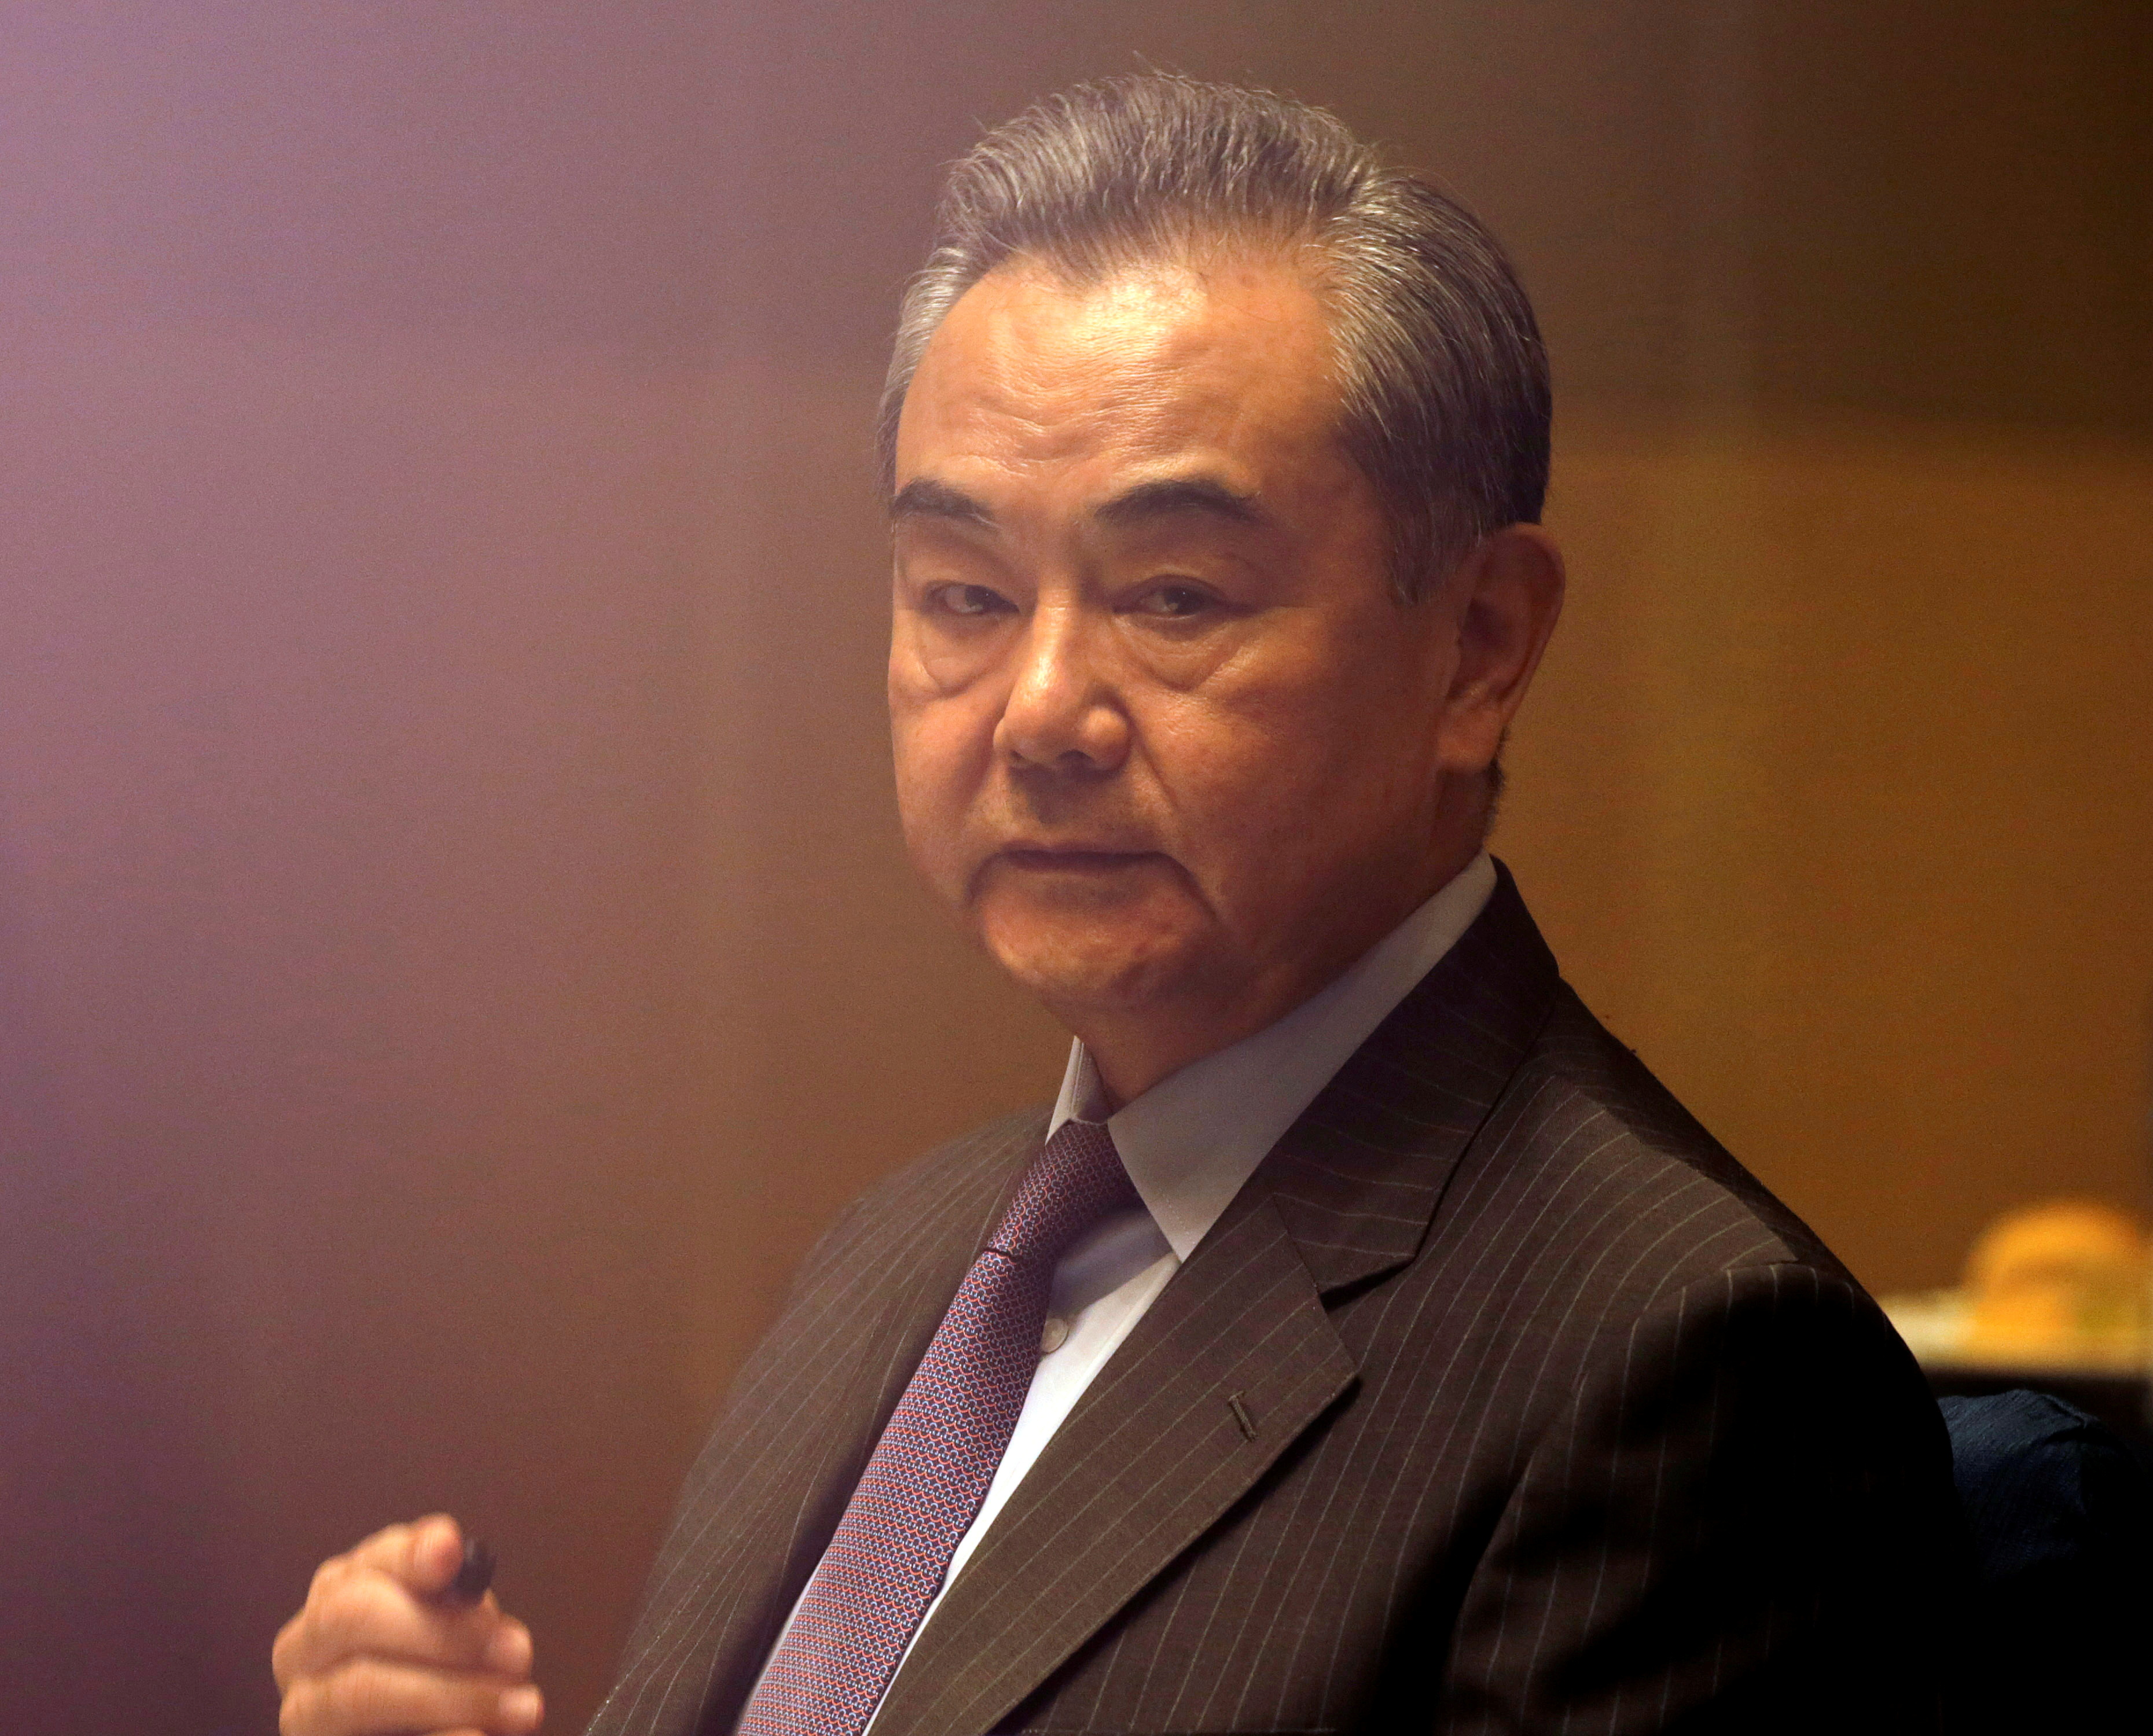 China's Foreign Minister Wang Yi listens during a meeting in Manila, Philippines January 16, 2021. Francis Malasig/Pool via REUTERS